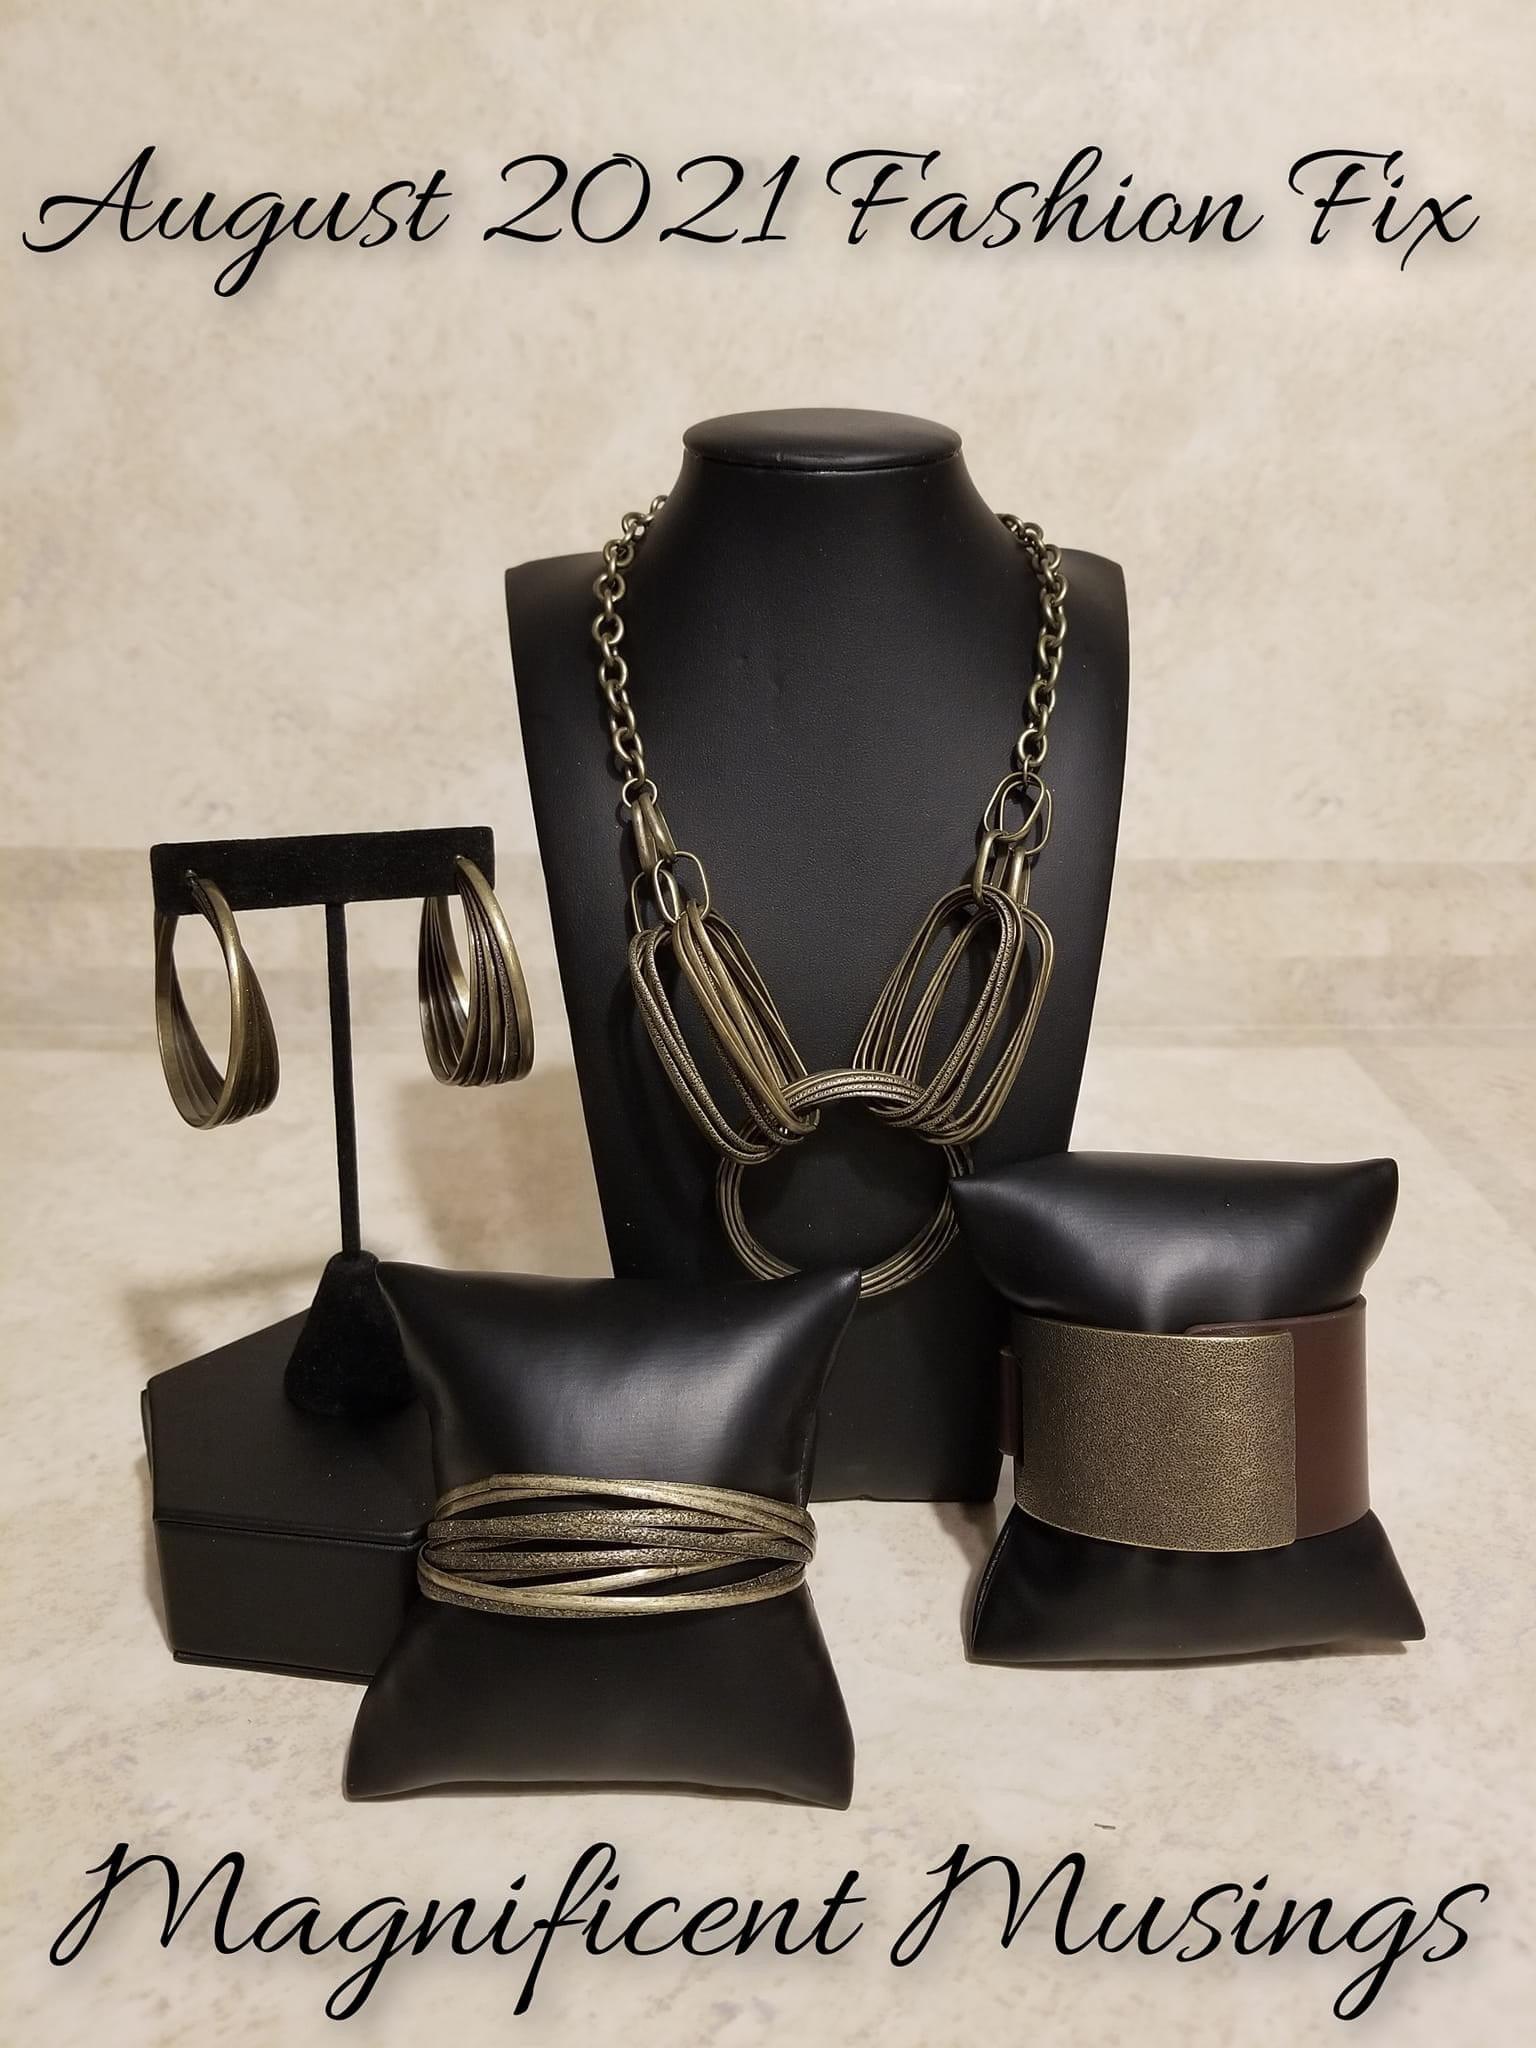 Paparazzi Accessories Magnificent Musings: FF August 2021 The styles featured in the Fiercely 5th Avenue collection are exactly what you would expect with a name like that: Sleek, classy, metallic designs that you’d find on the streets of New York. The ac